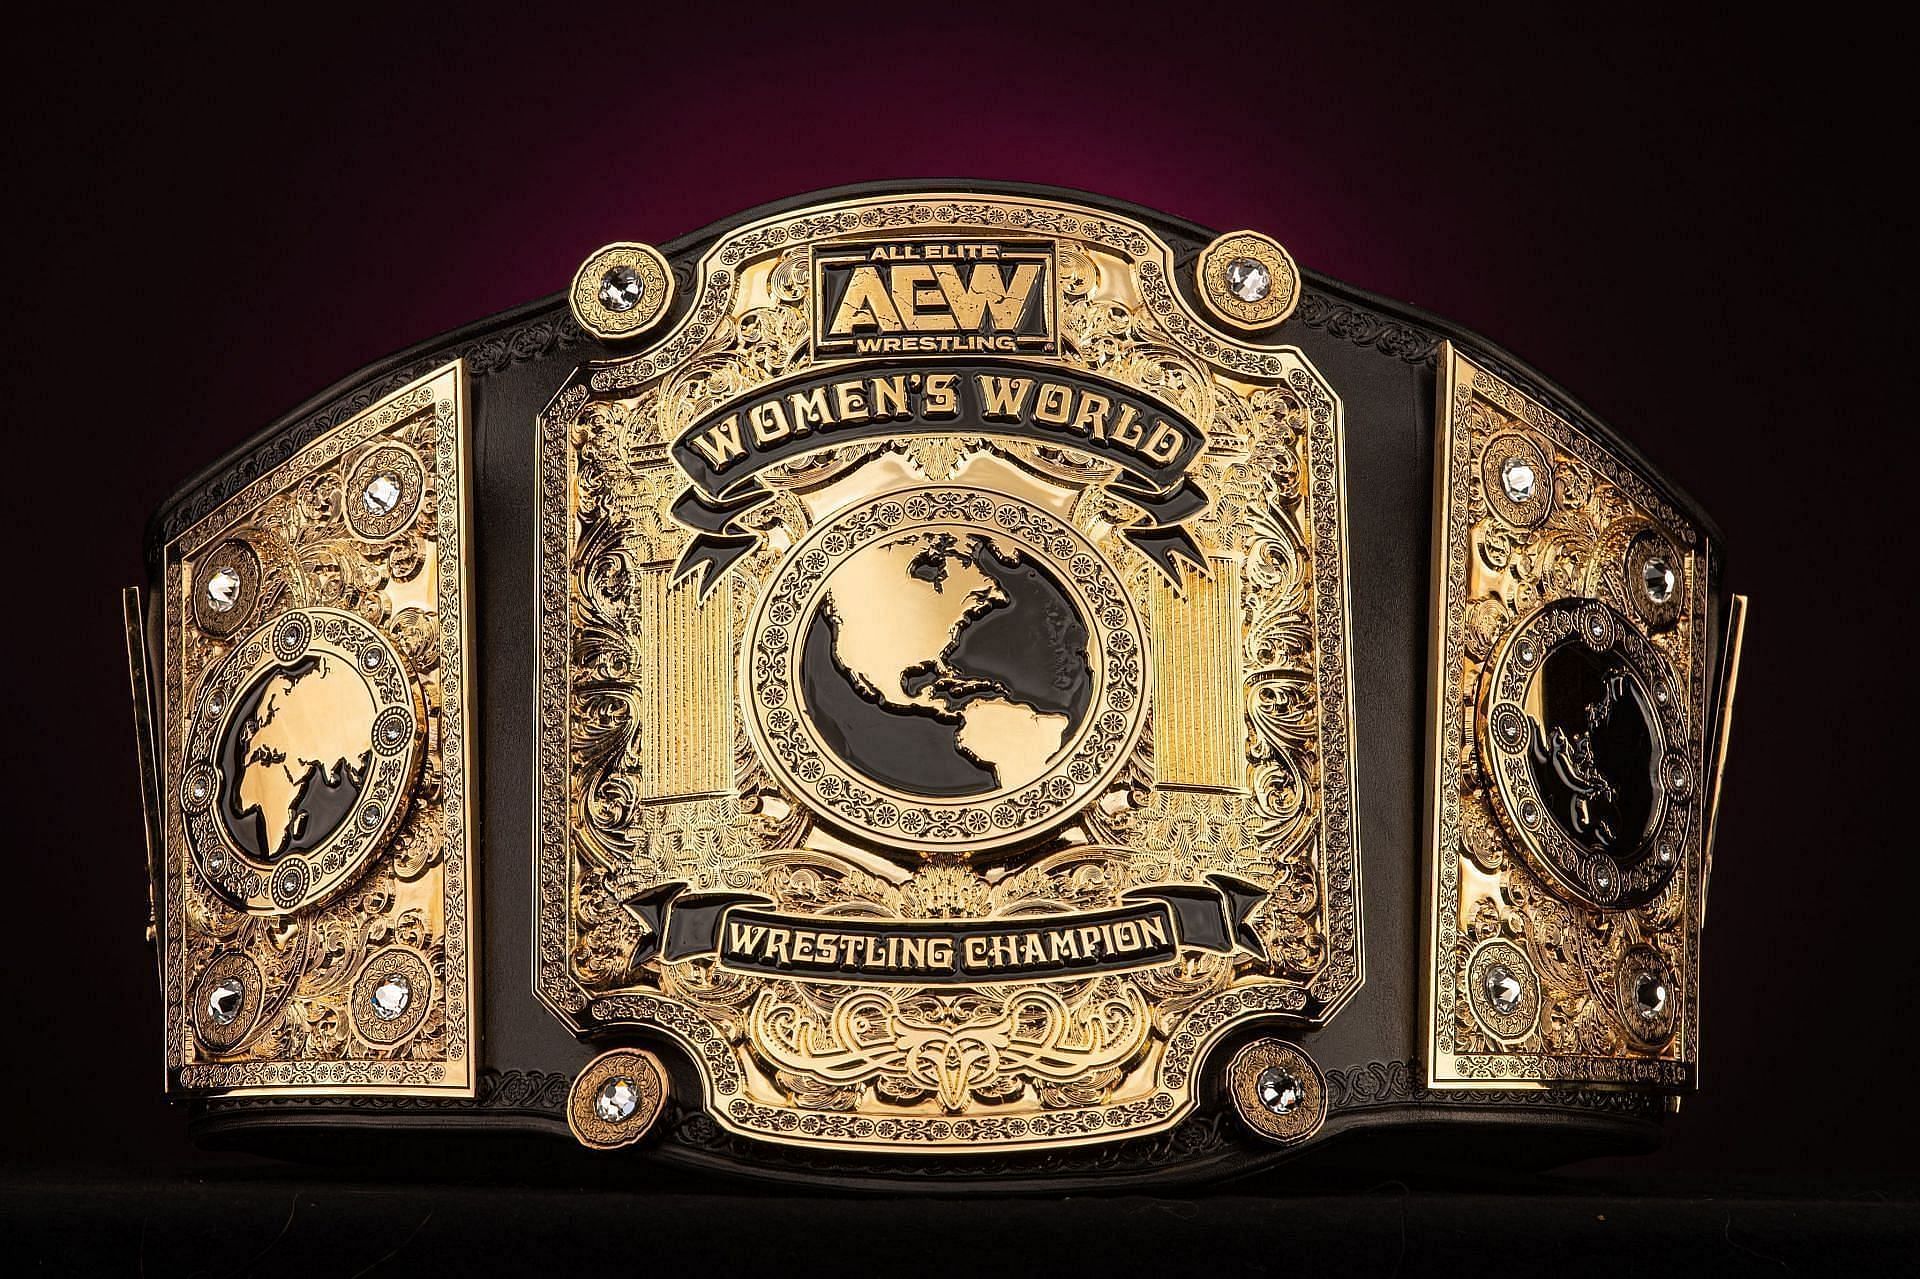 All Elite Wrestling on X: &quot;Here is a better look at the New #AEW Women&#039;s  World Championship #AEWRevolution https://t.co/johMWIjkOk&quot; / X